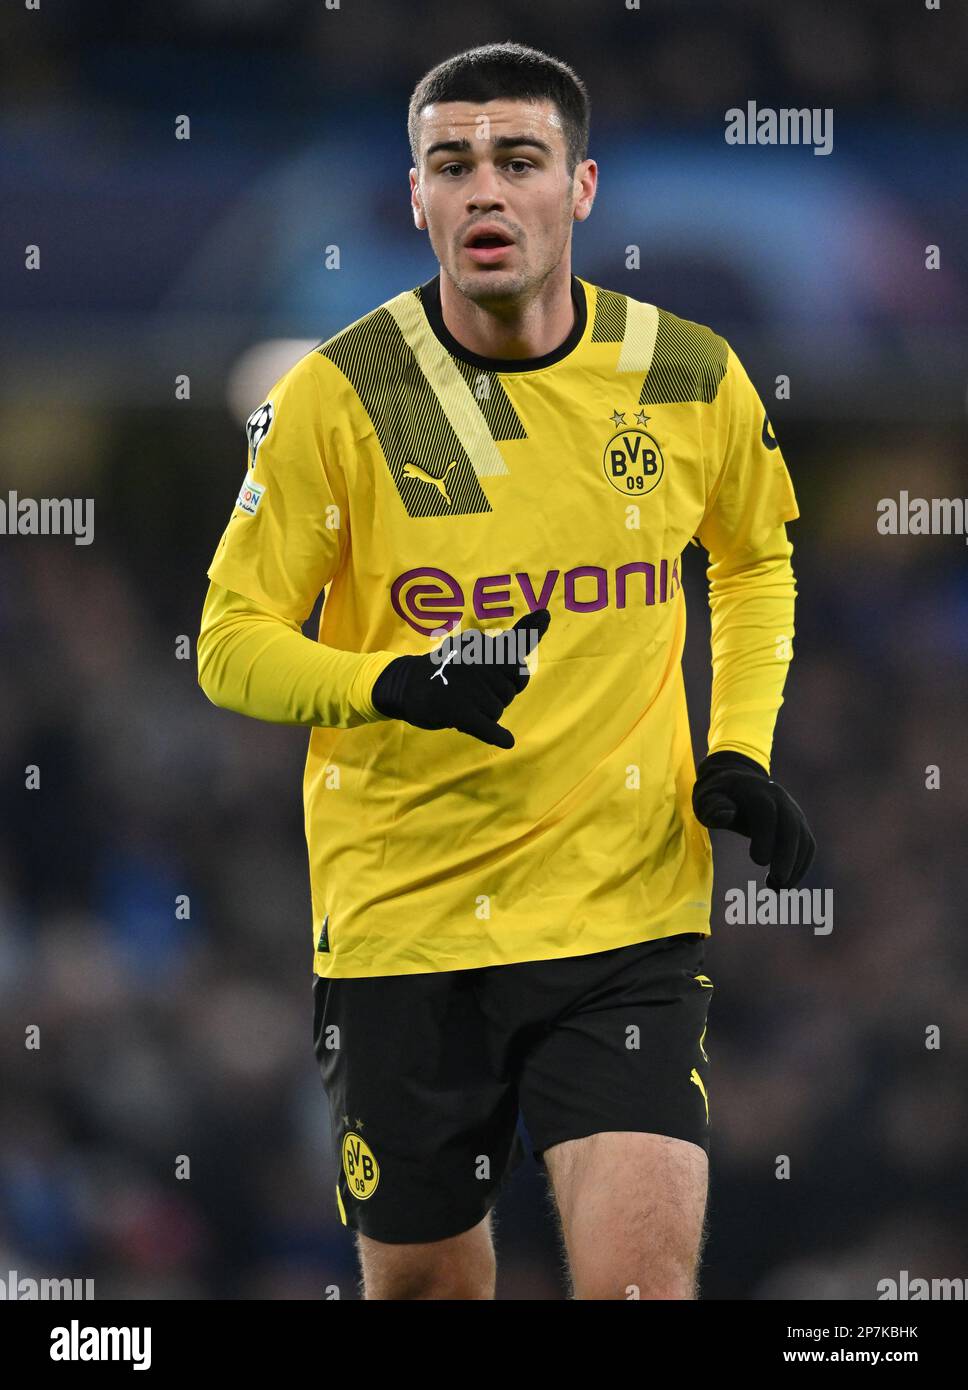 England, London, 07 March 2023 - Raphael Guerreiro of BVB Borussia Dortmund during the UEFA Champions League round of 16 leg two match between Chelsea Stock Photo